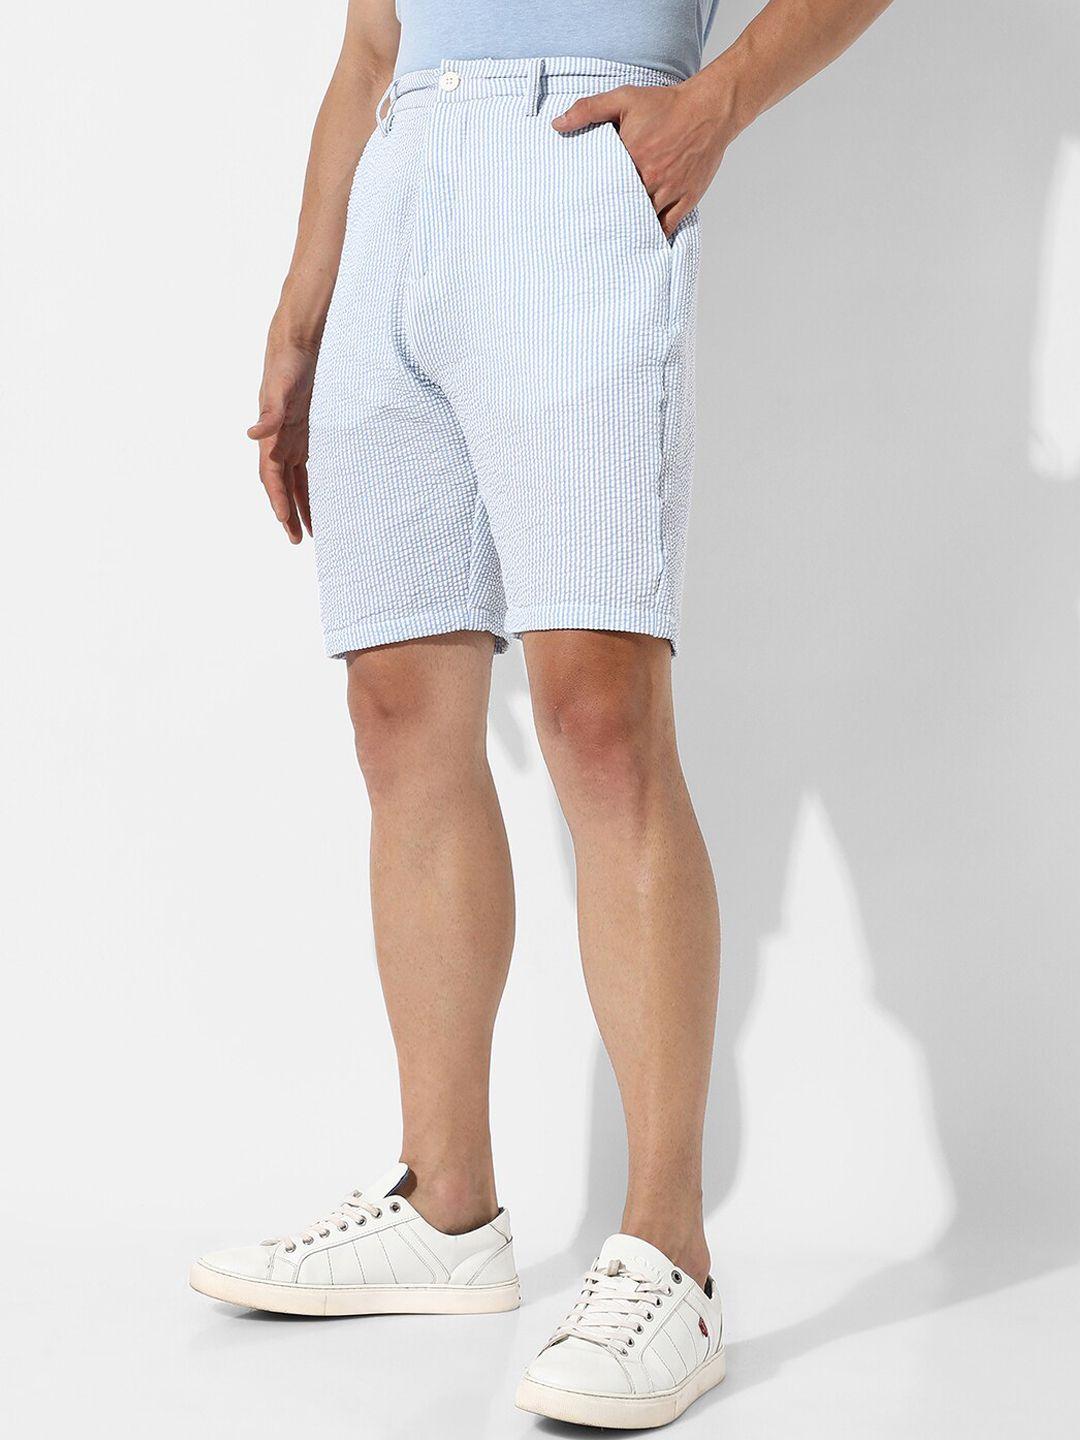 campus-sutra-men-striped-mid-rise-cotton-shorts